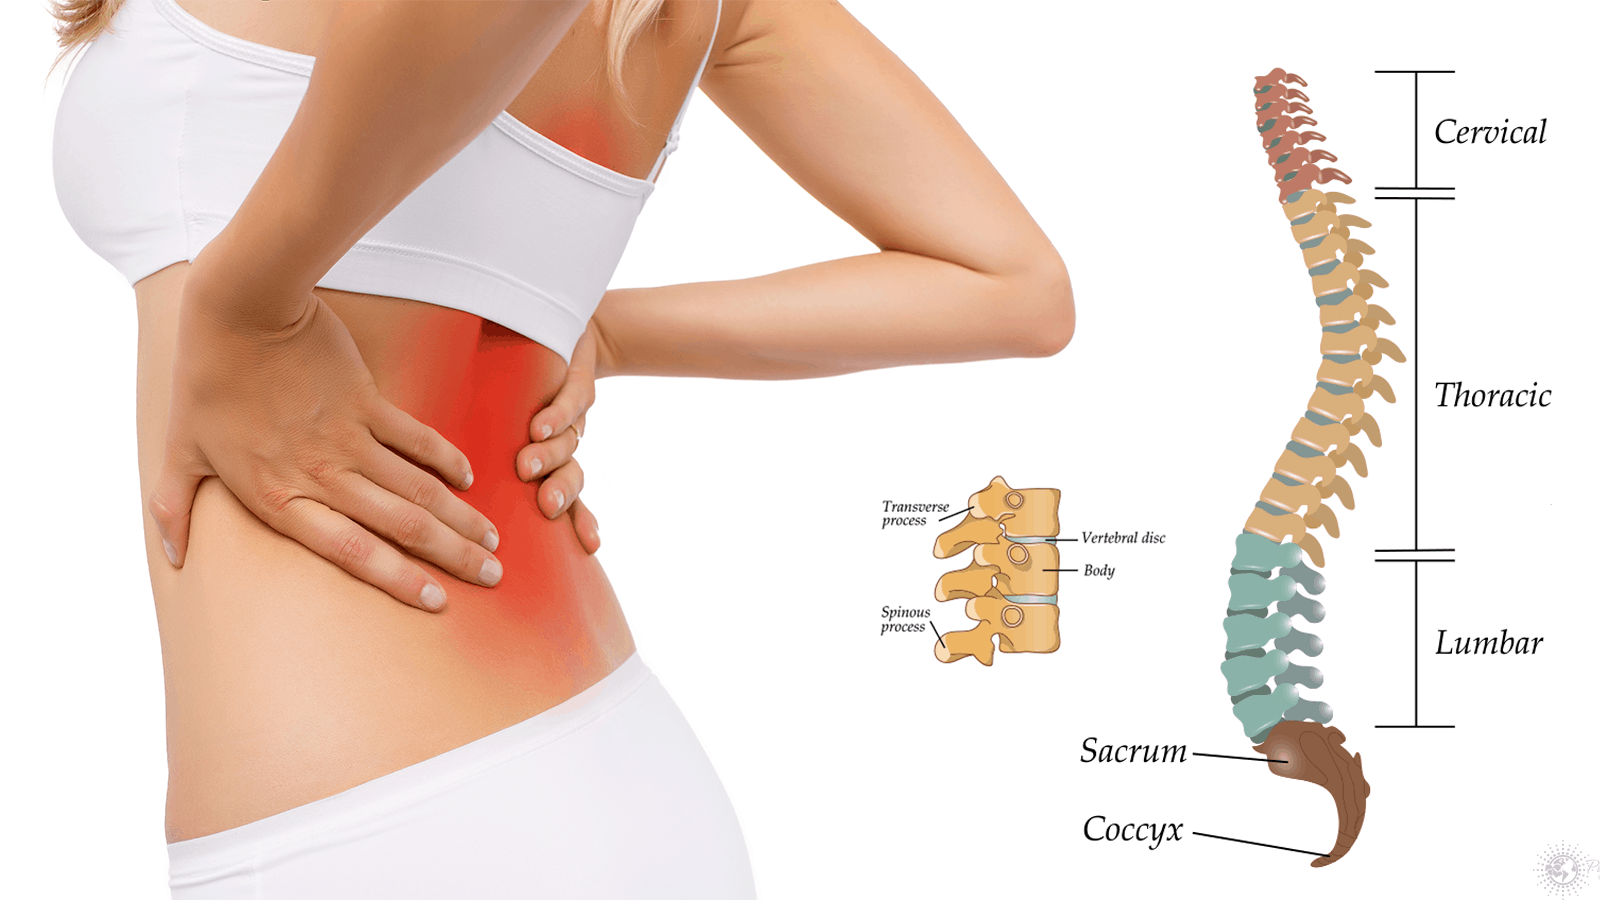 What Causes Back Pain? 7 Key Ways to Manage It at Home